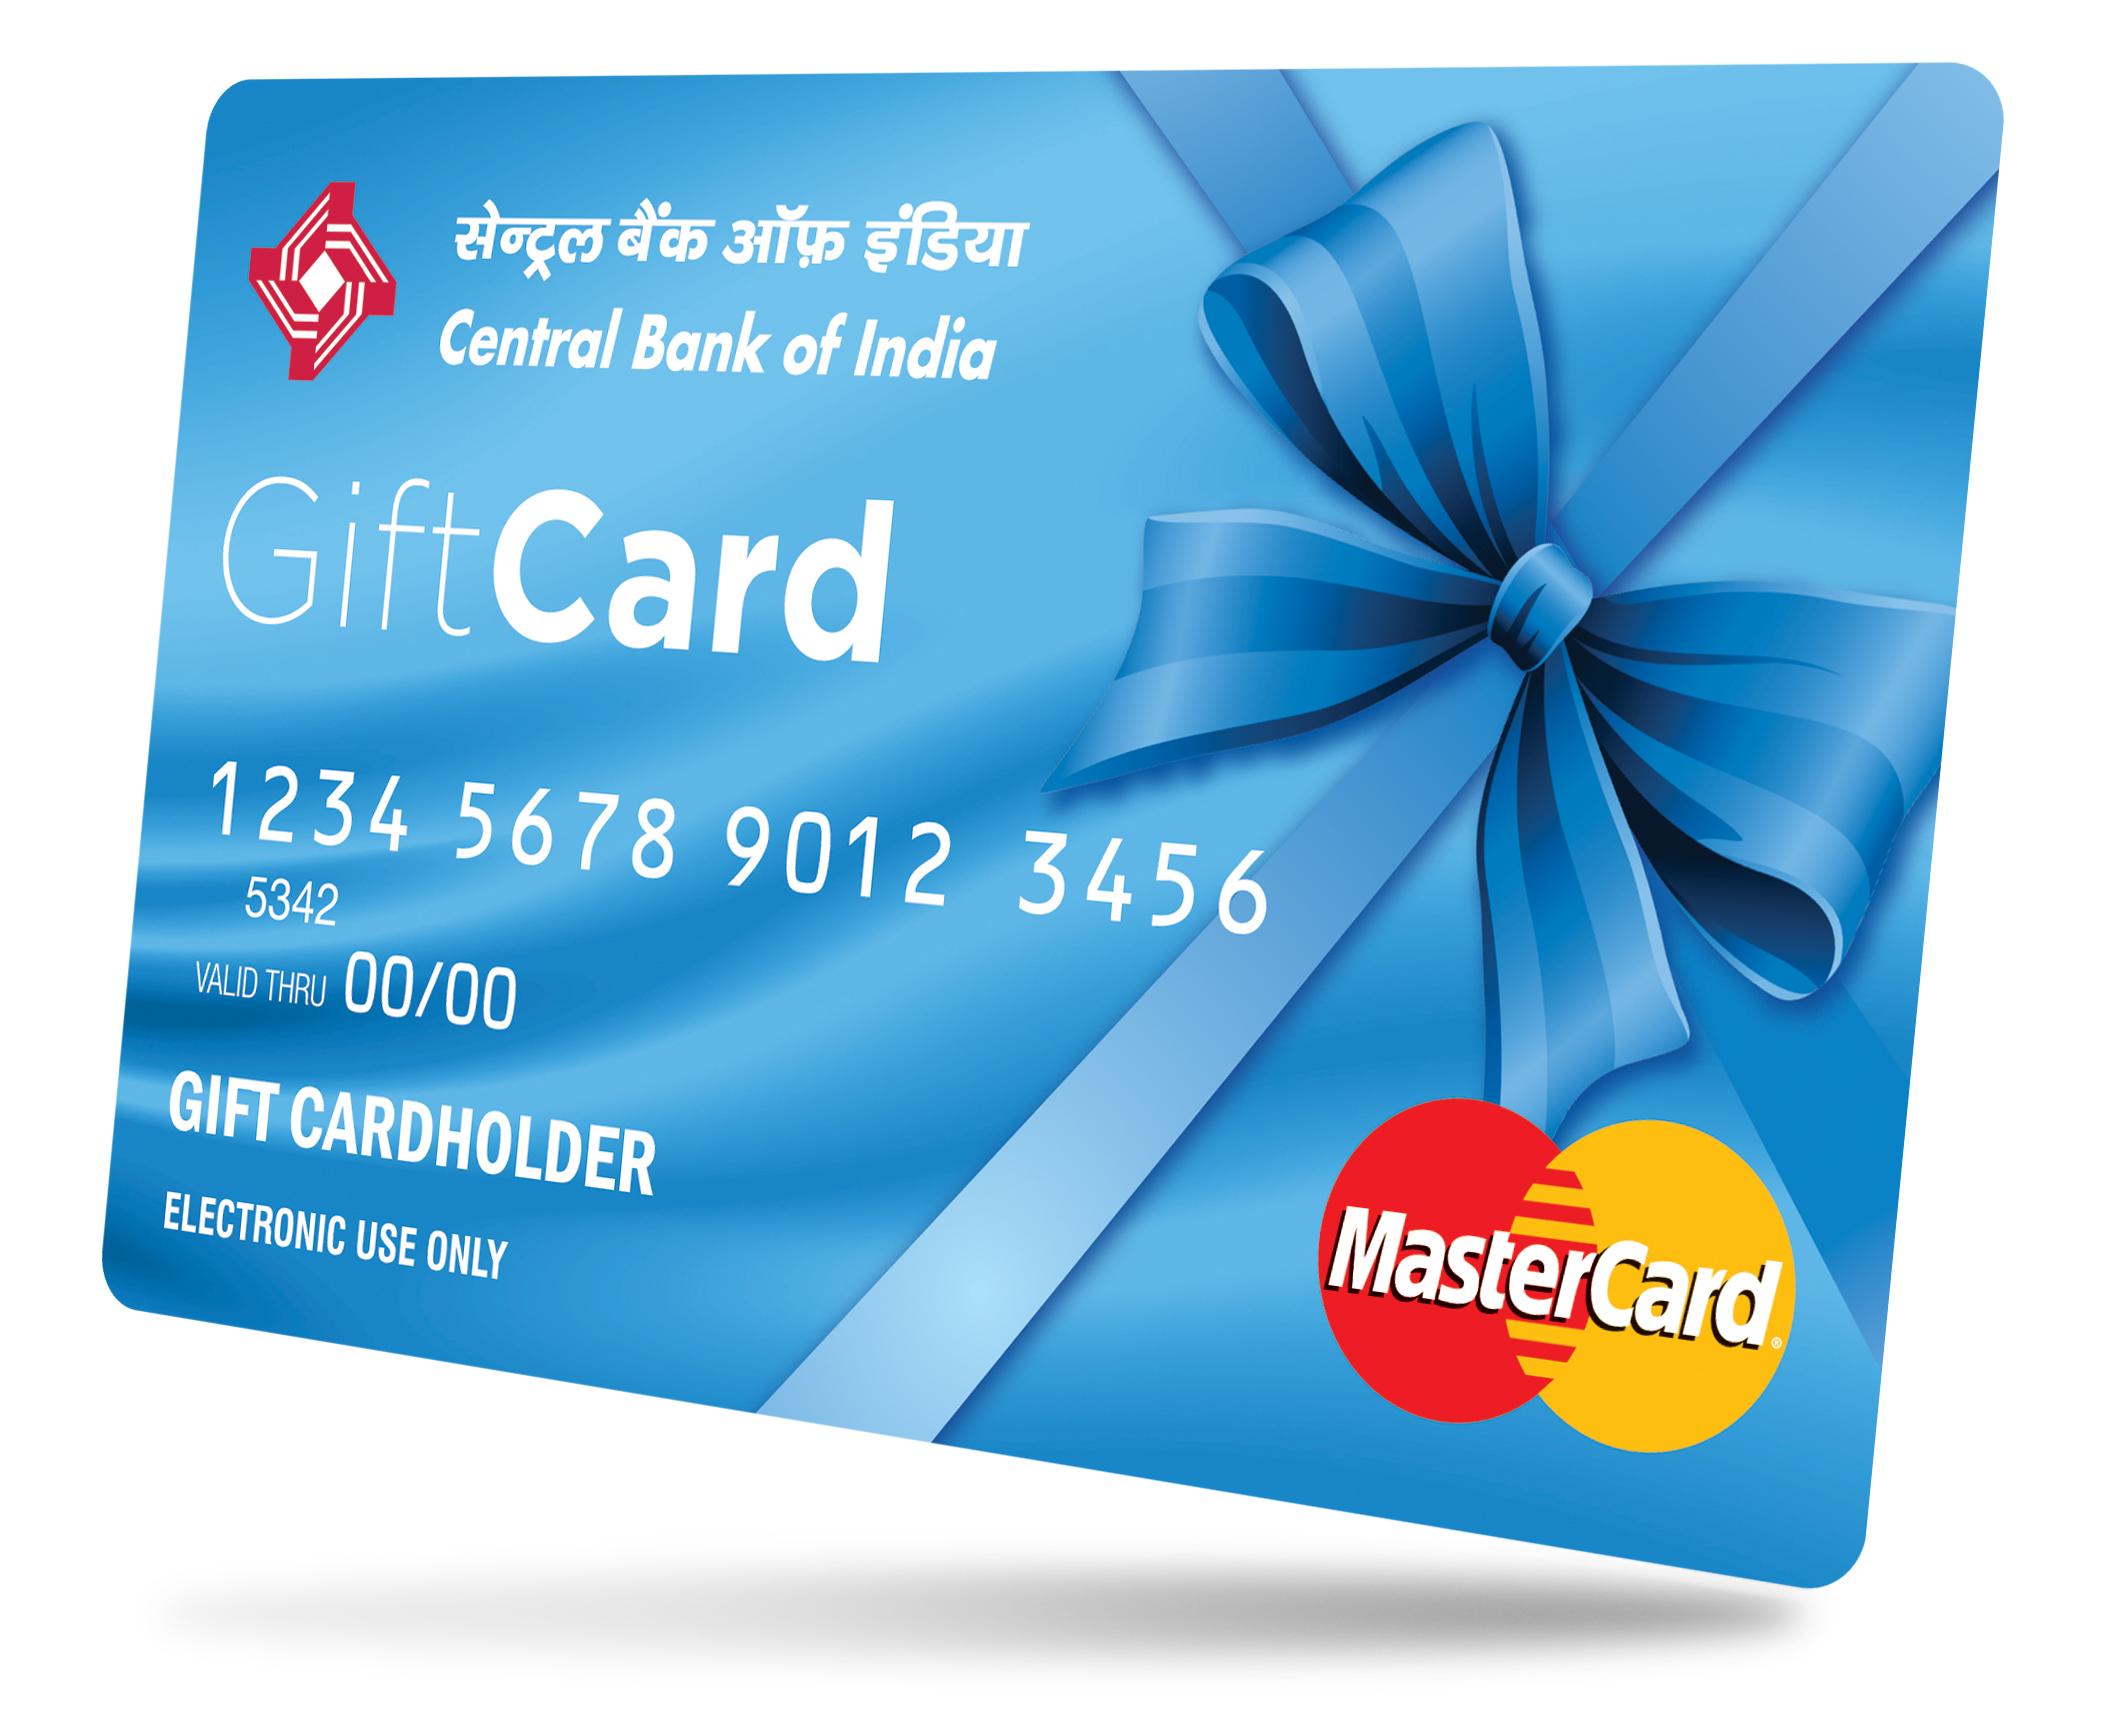 Central Bank Of India Debuts Gift And Virtual Cards To Ease Holiday Gifting.